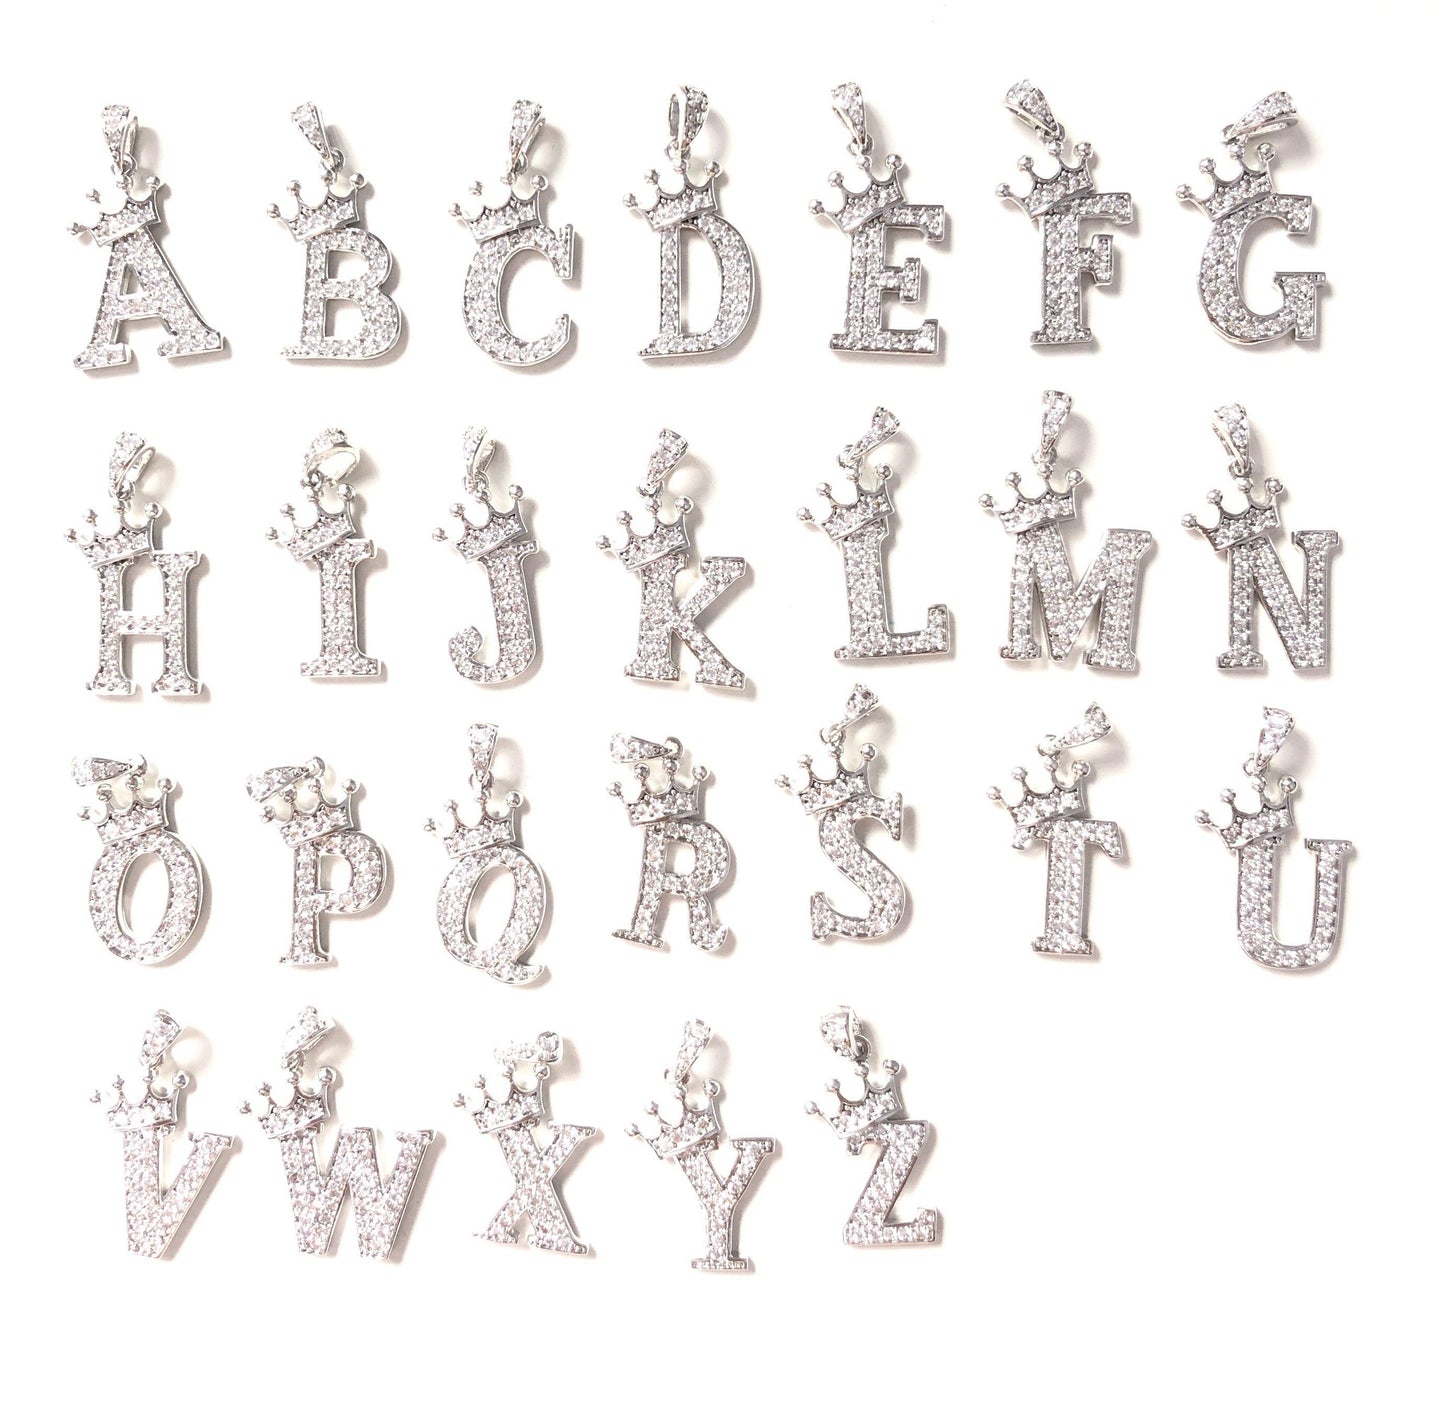 26pcs/lot 20mm CZ Paved Crown Initial Letter Alphabet Charms Silver, 26pcs from A to Z CZ Paved Charms Initials & Numbers Charms Beads Beyond